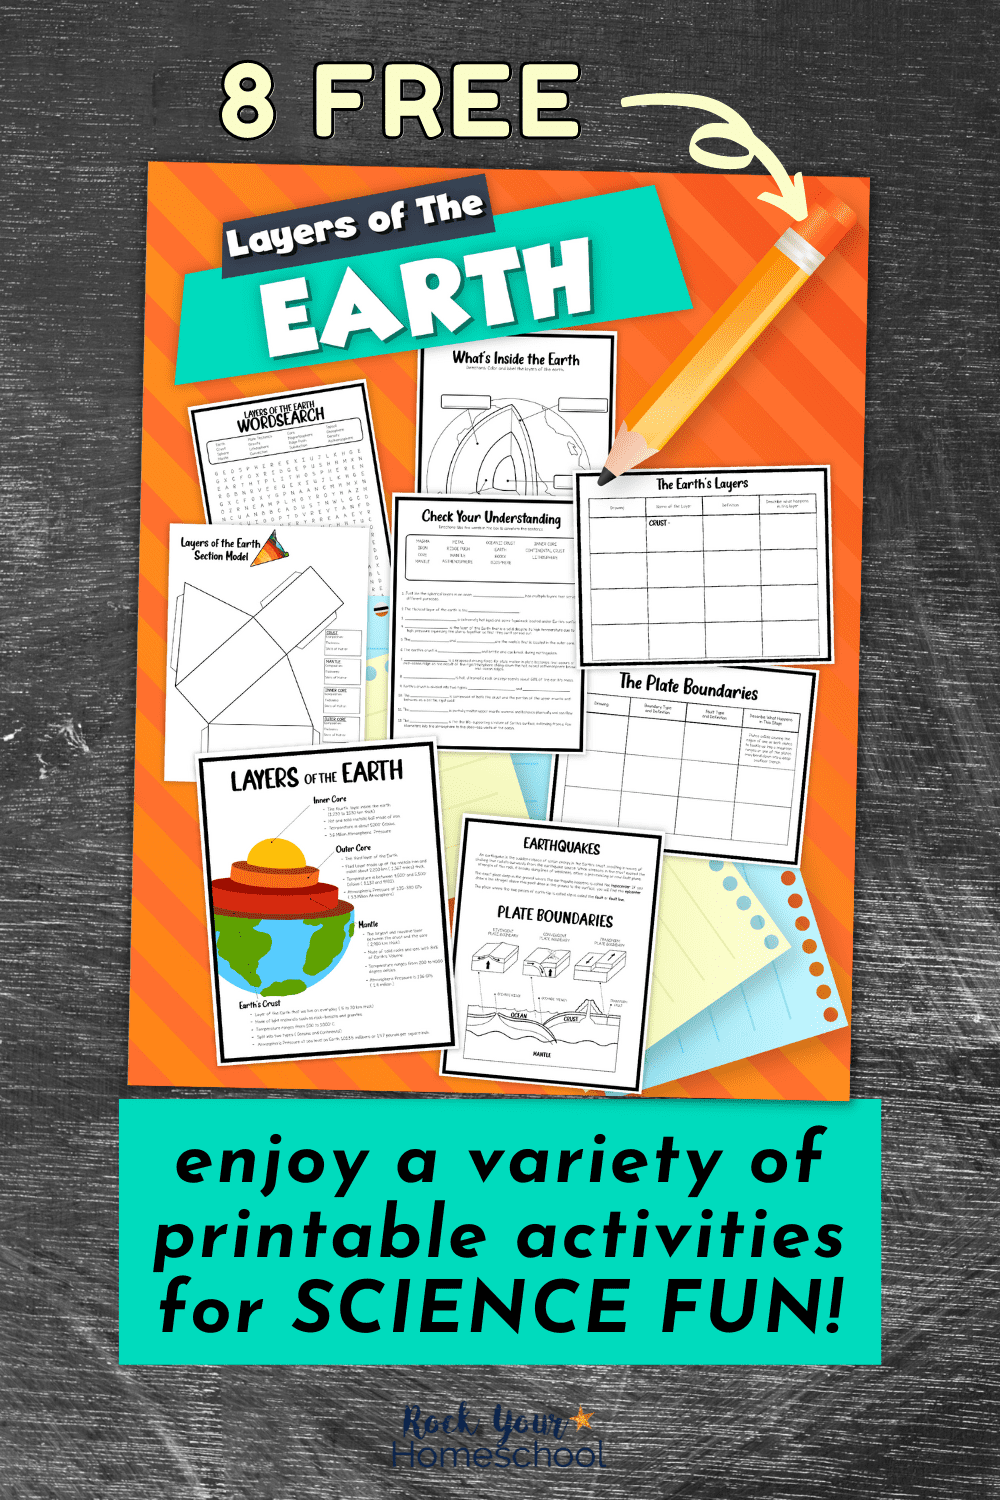 Layers of the Earth Activities: 11 Cool Ways to Enjoy Science Fun (+ Free Printables)